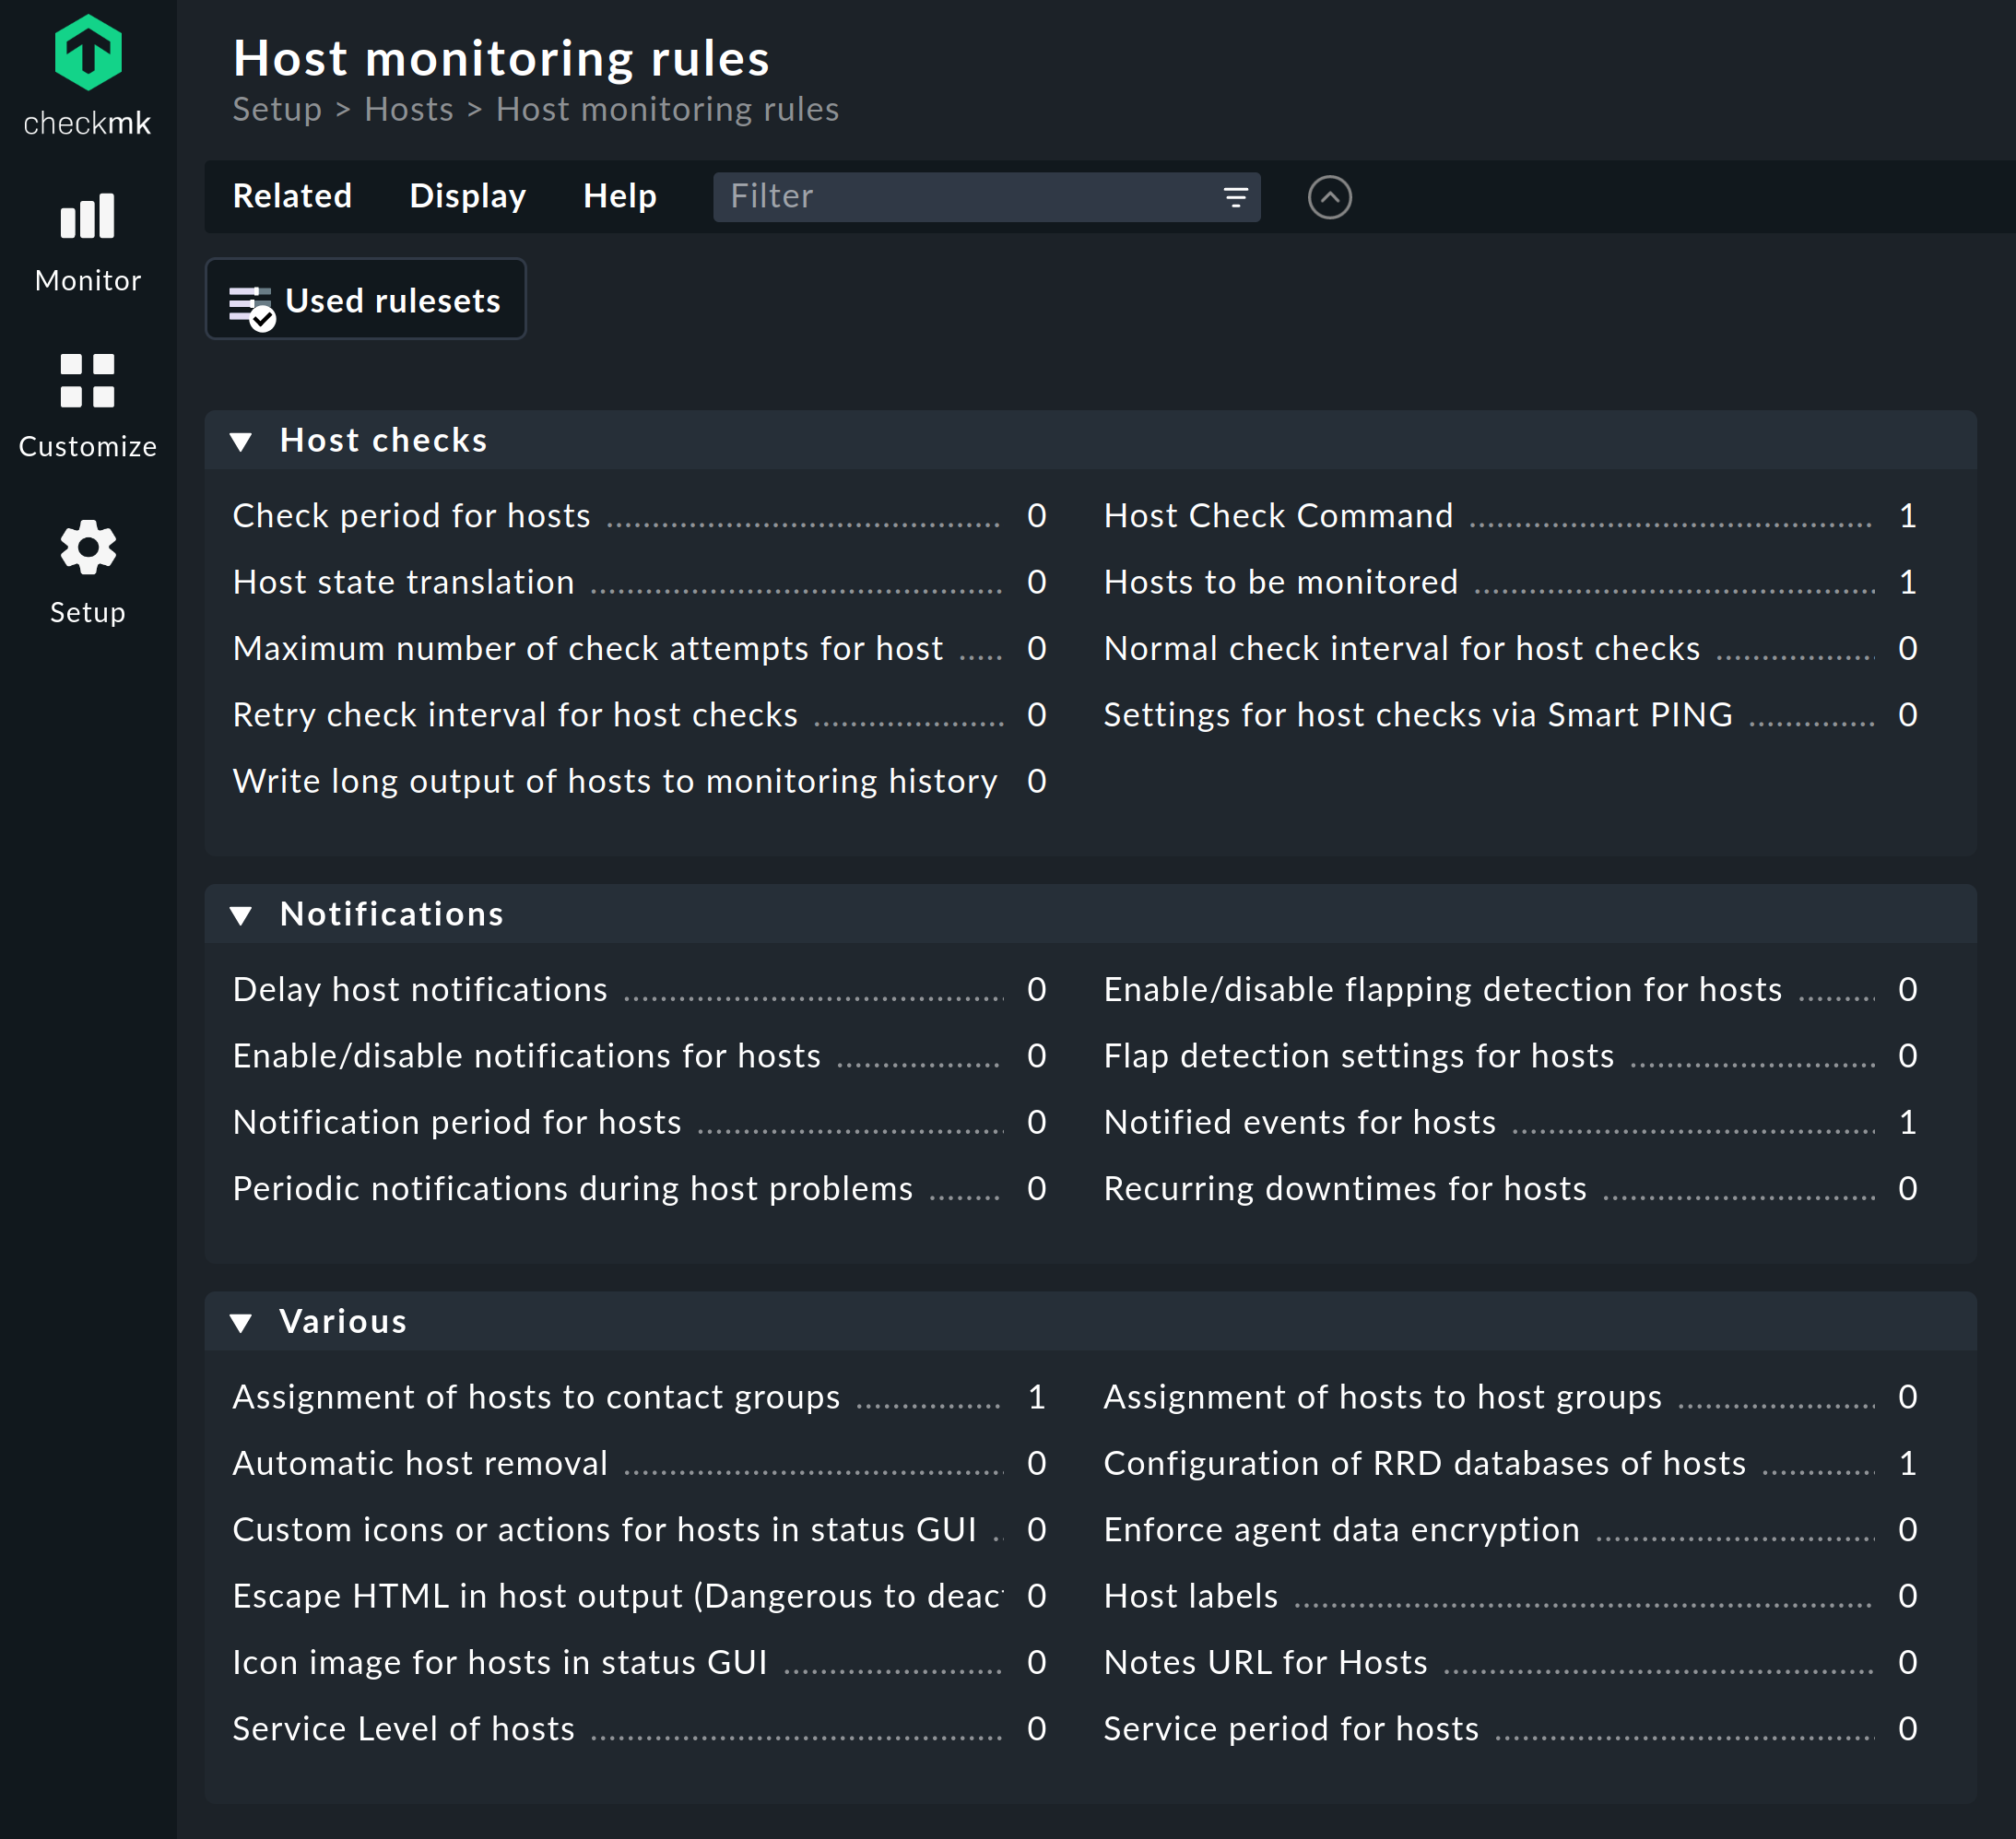 The 'Host monitoring rules' in the Setup menu.